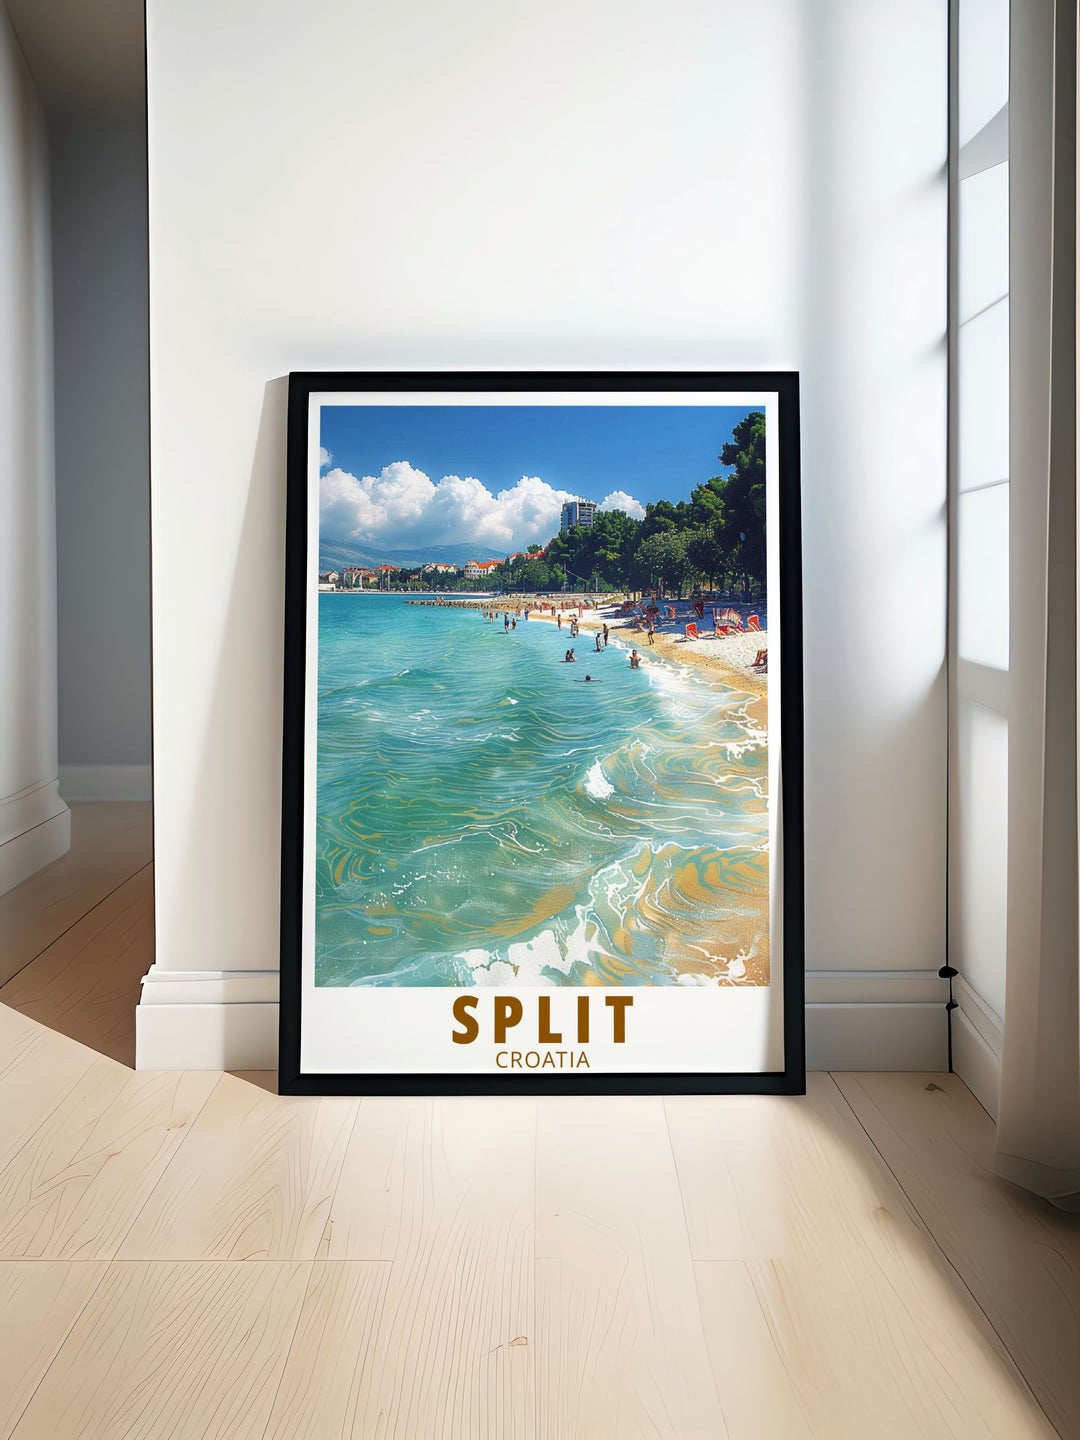 This travel poster highlights the dynamic culture of Split, inviting viewers to experience the vibrant beach scenes and lively atmosphere of Bačvice Beach in Croatia.